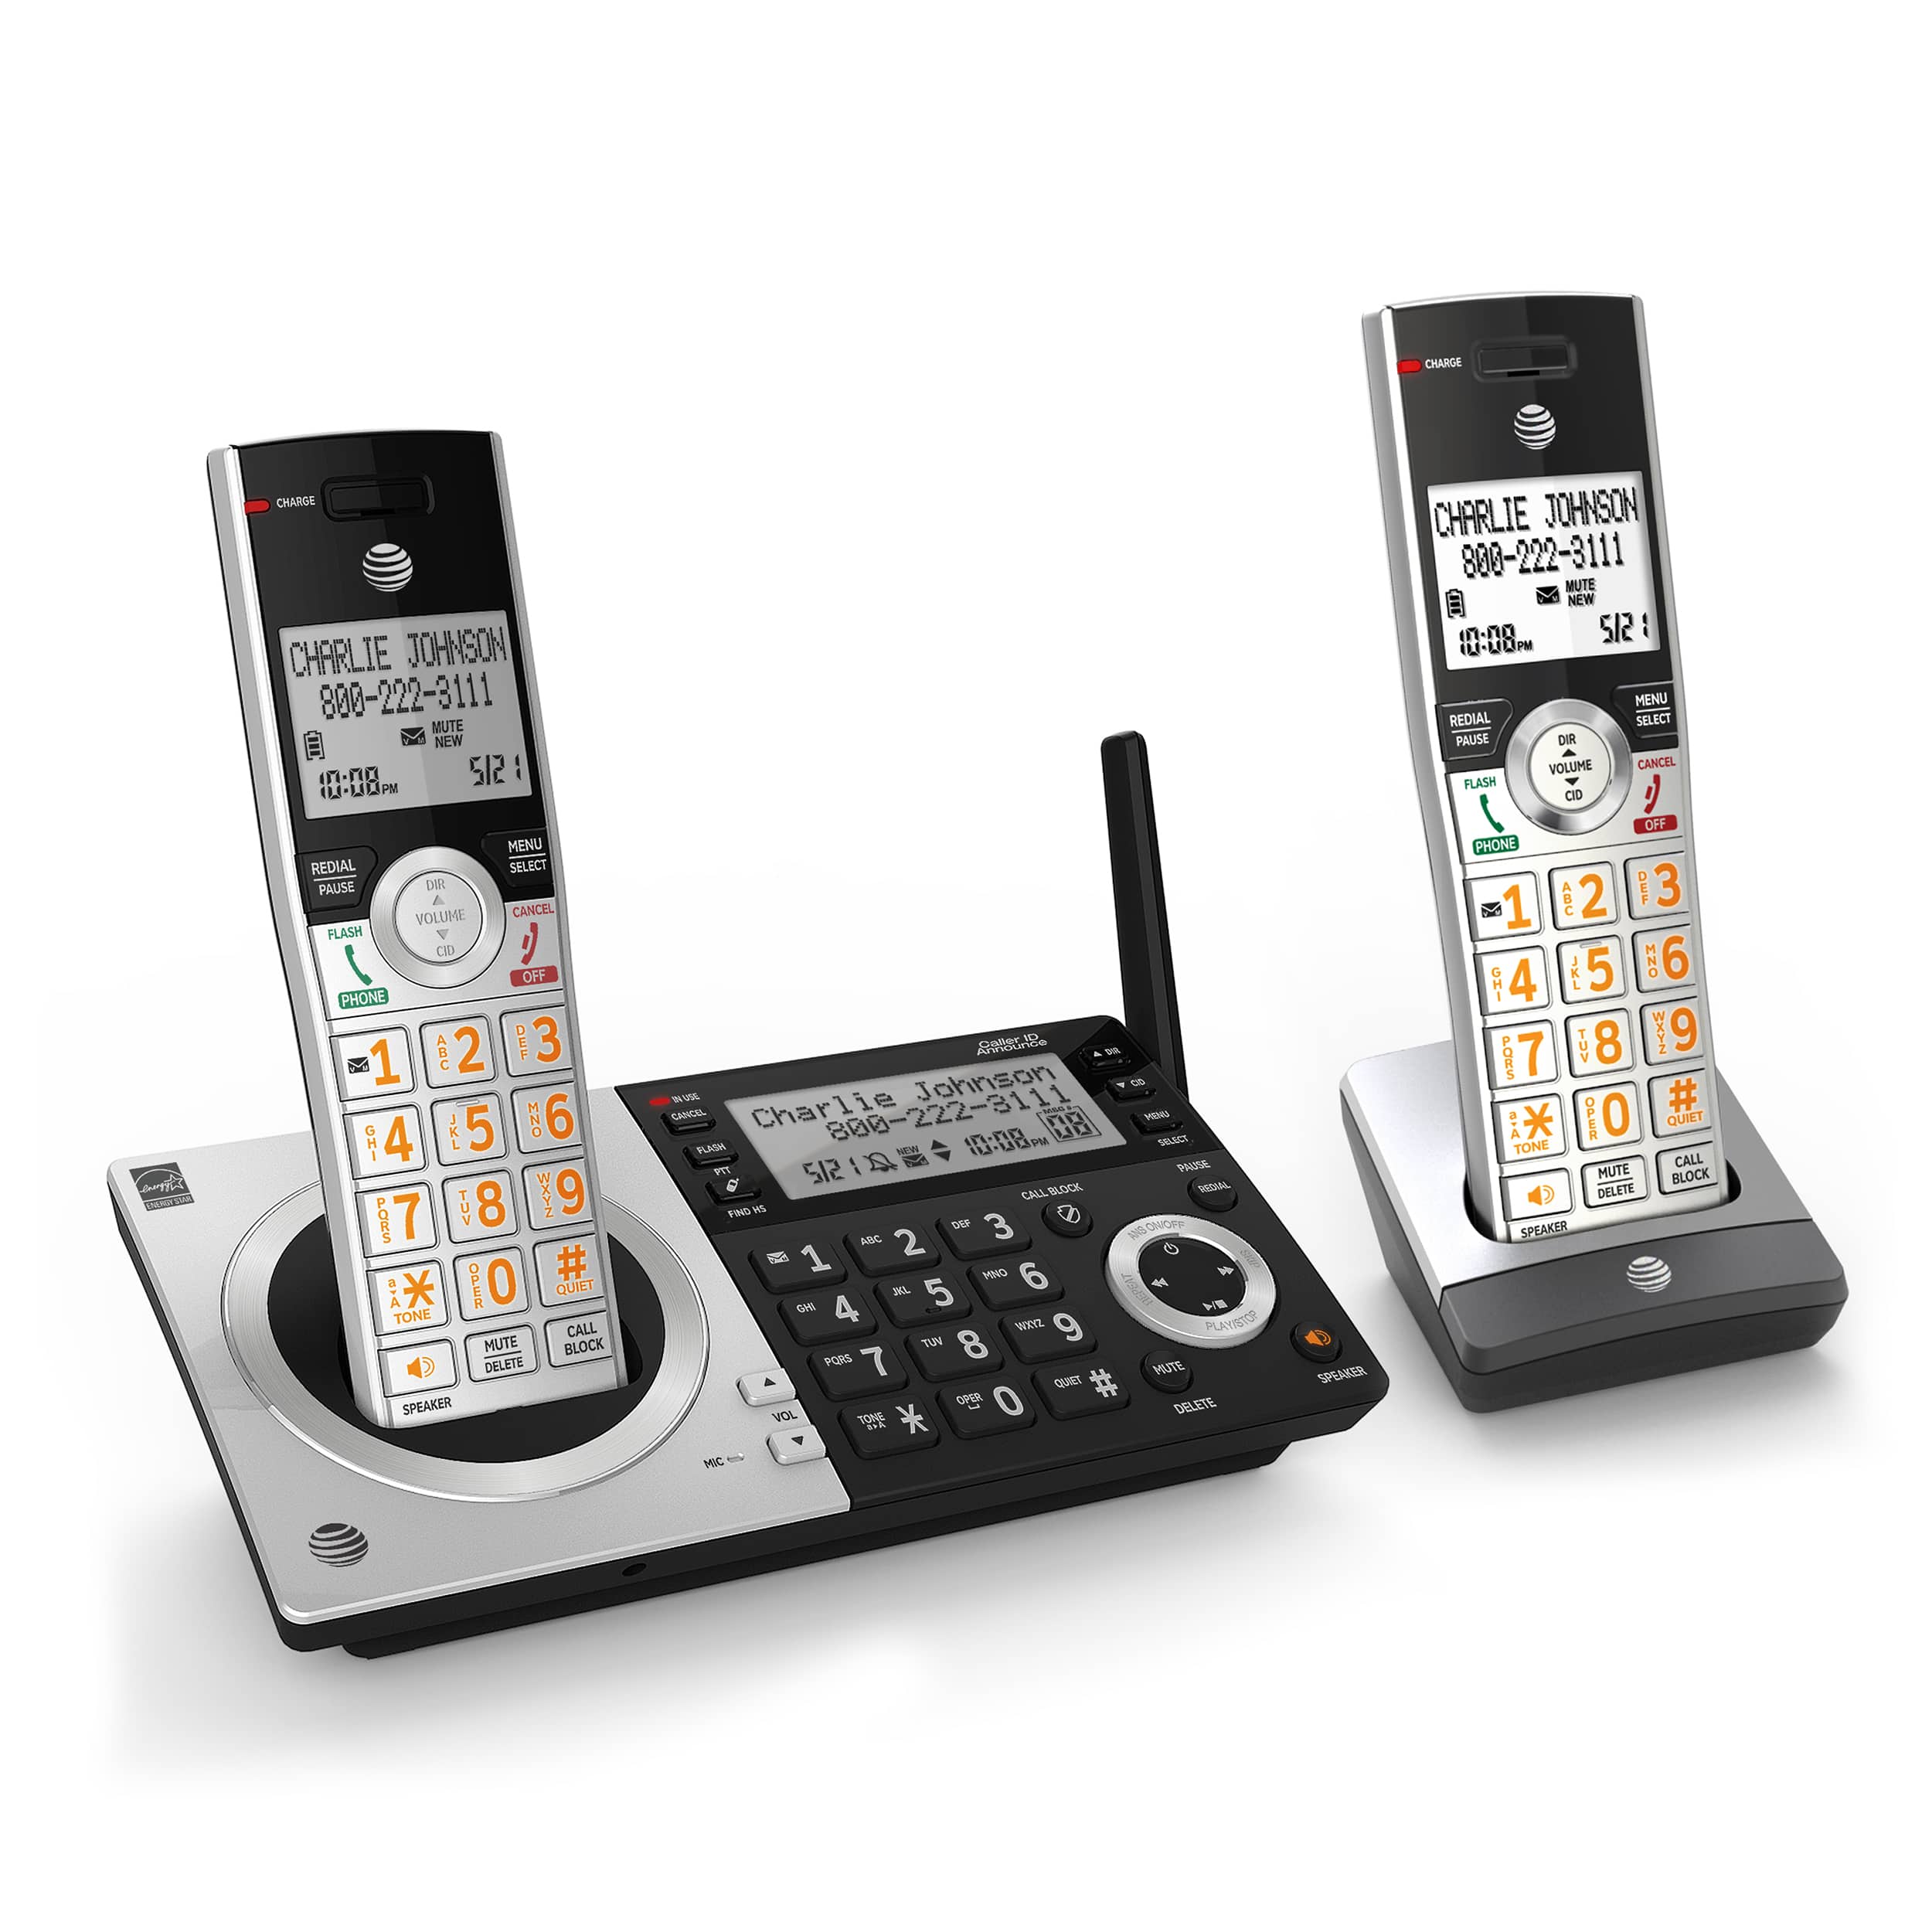 2 handset phone system with smart call blocker - view 3